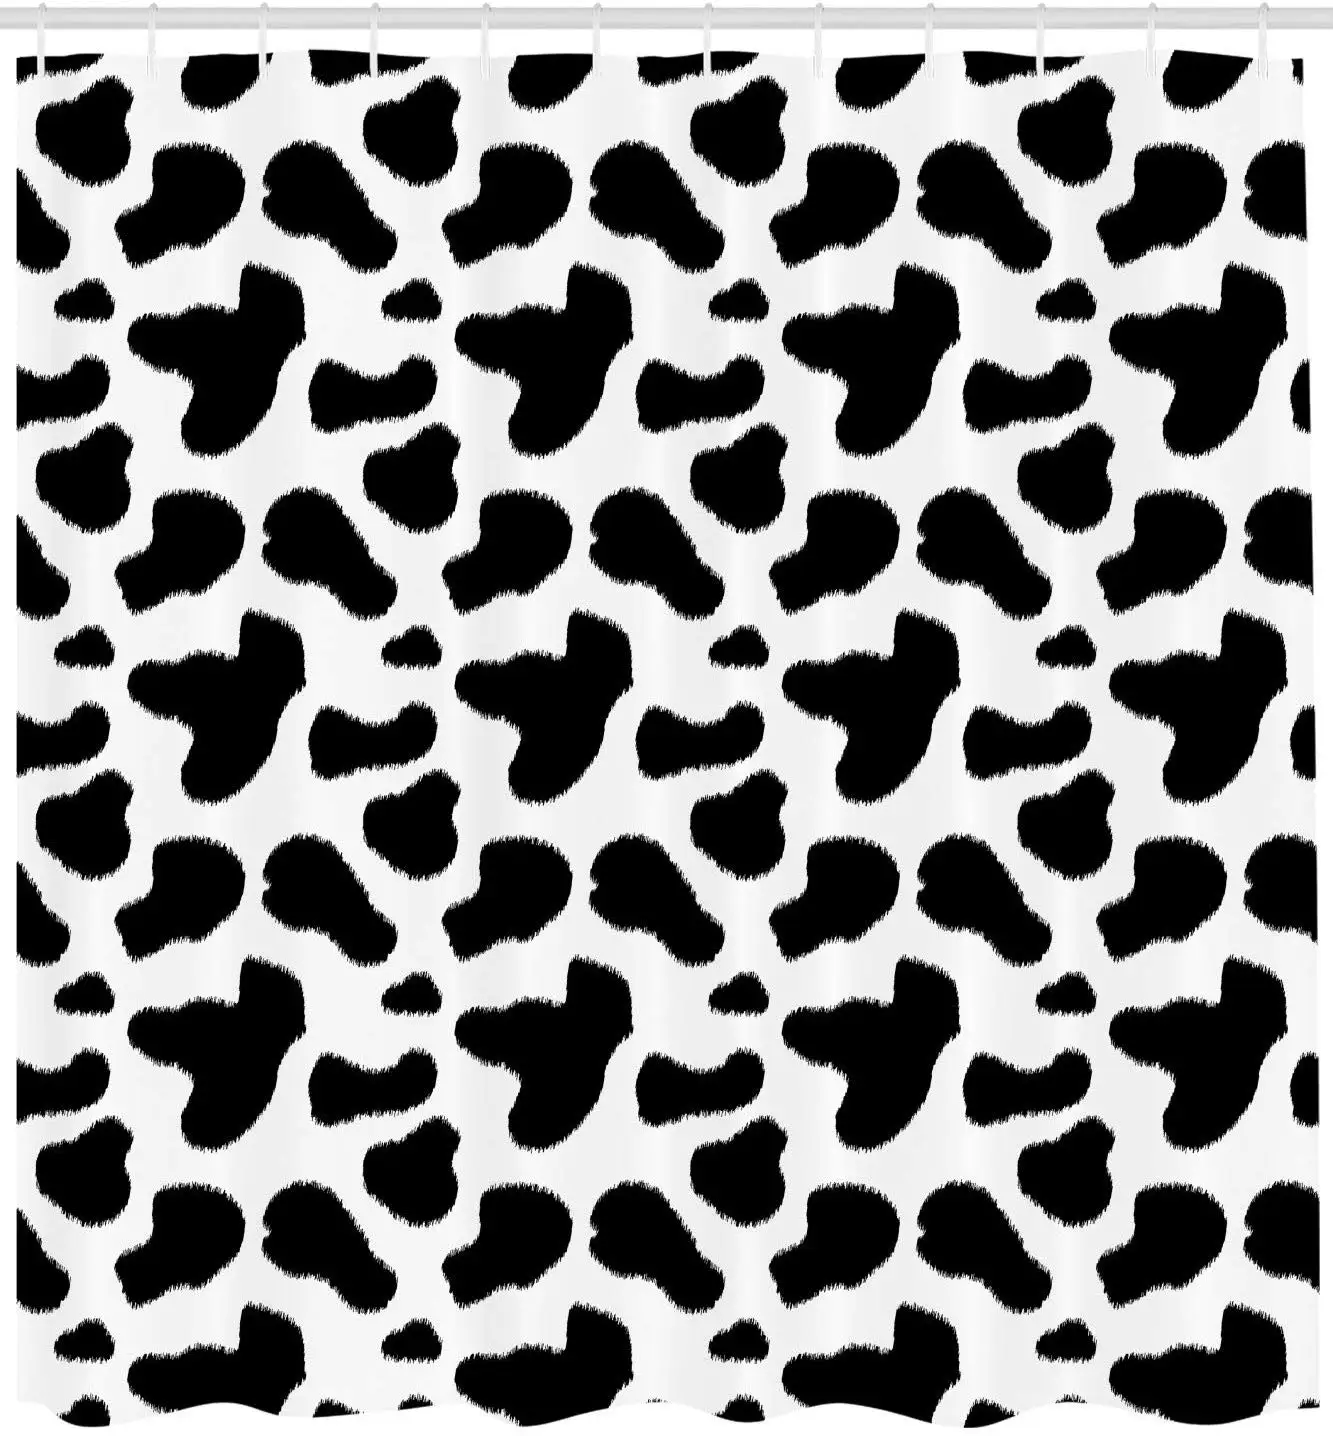 Cow Print Shower Curtain Sets Abstract Black White Pattern for Bathroom Decor 